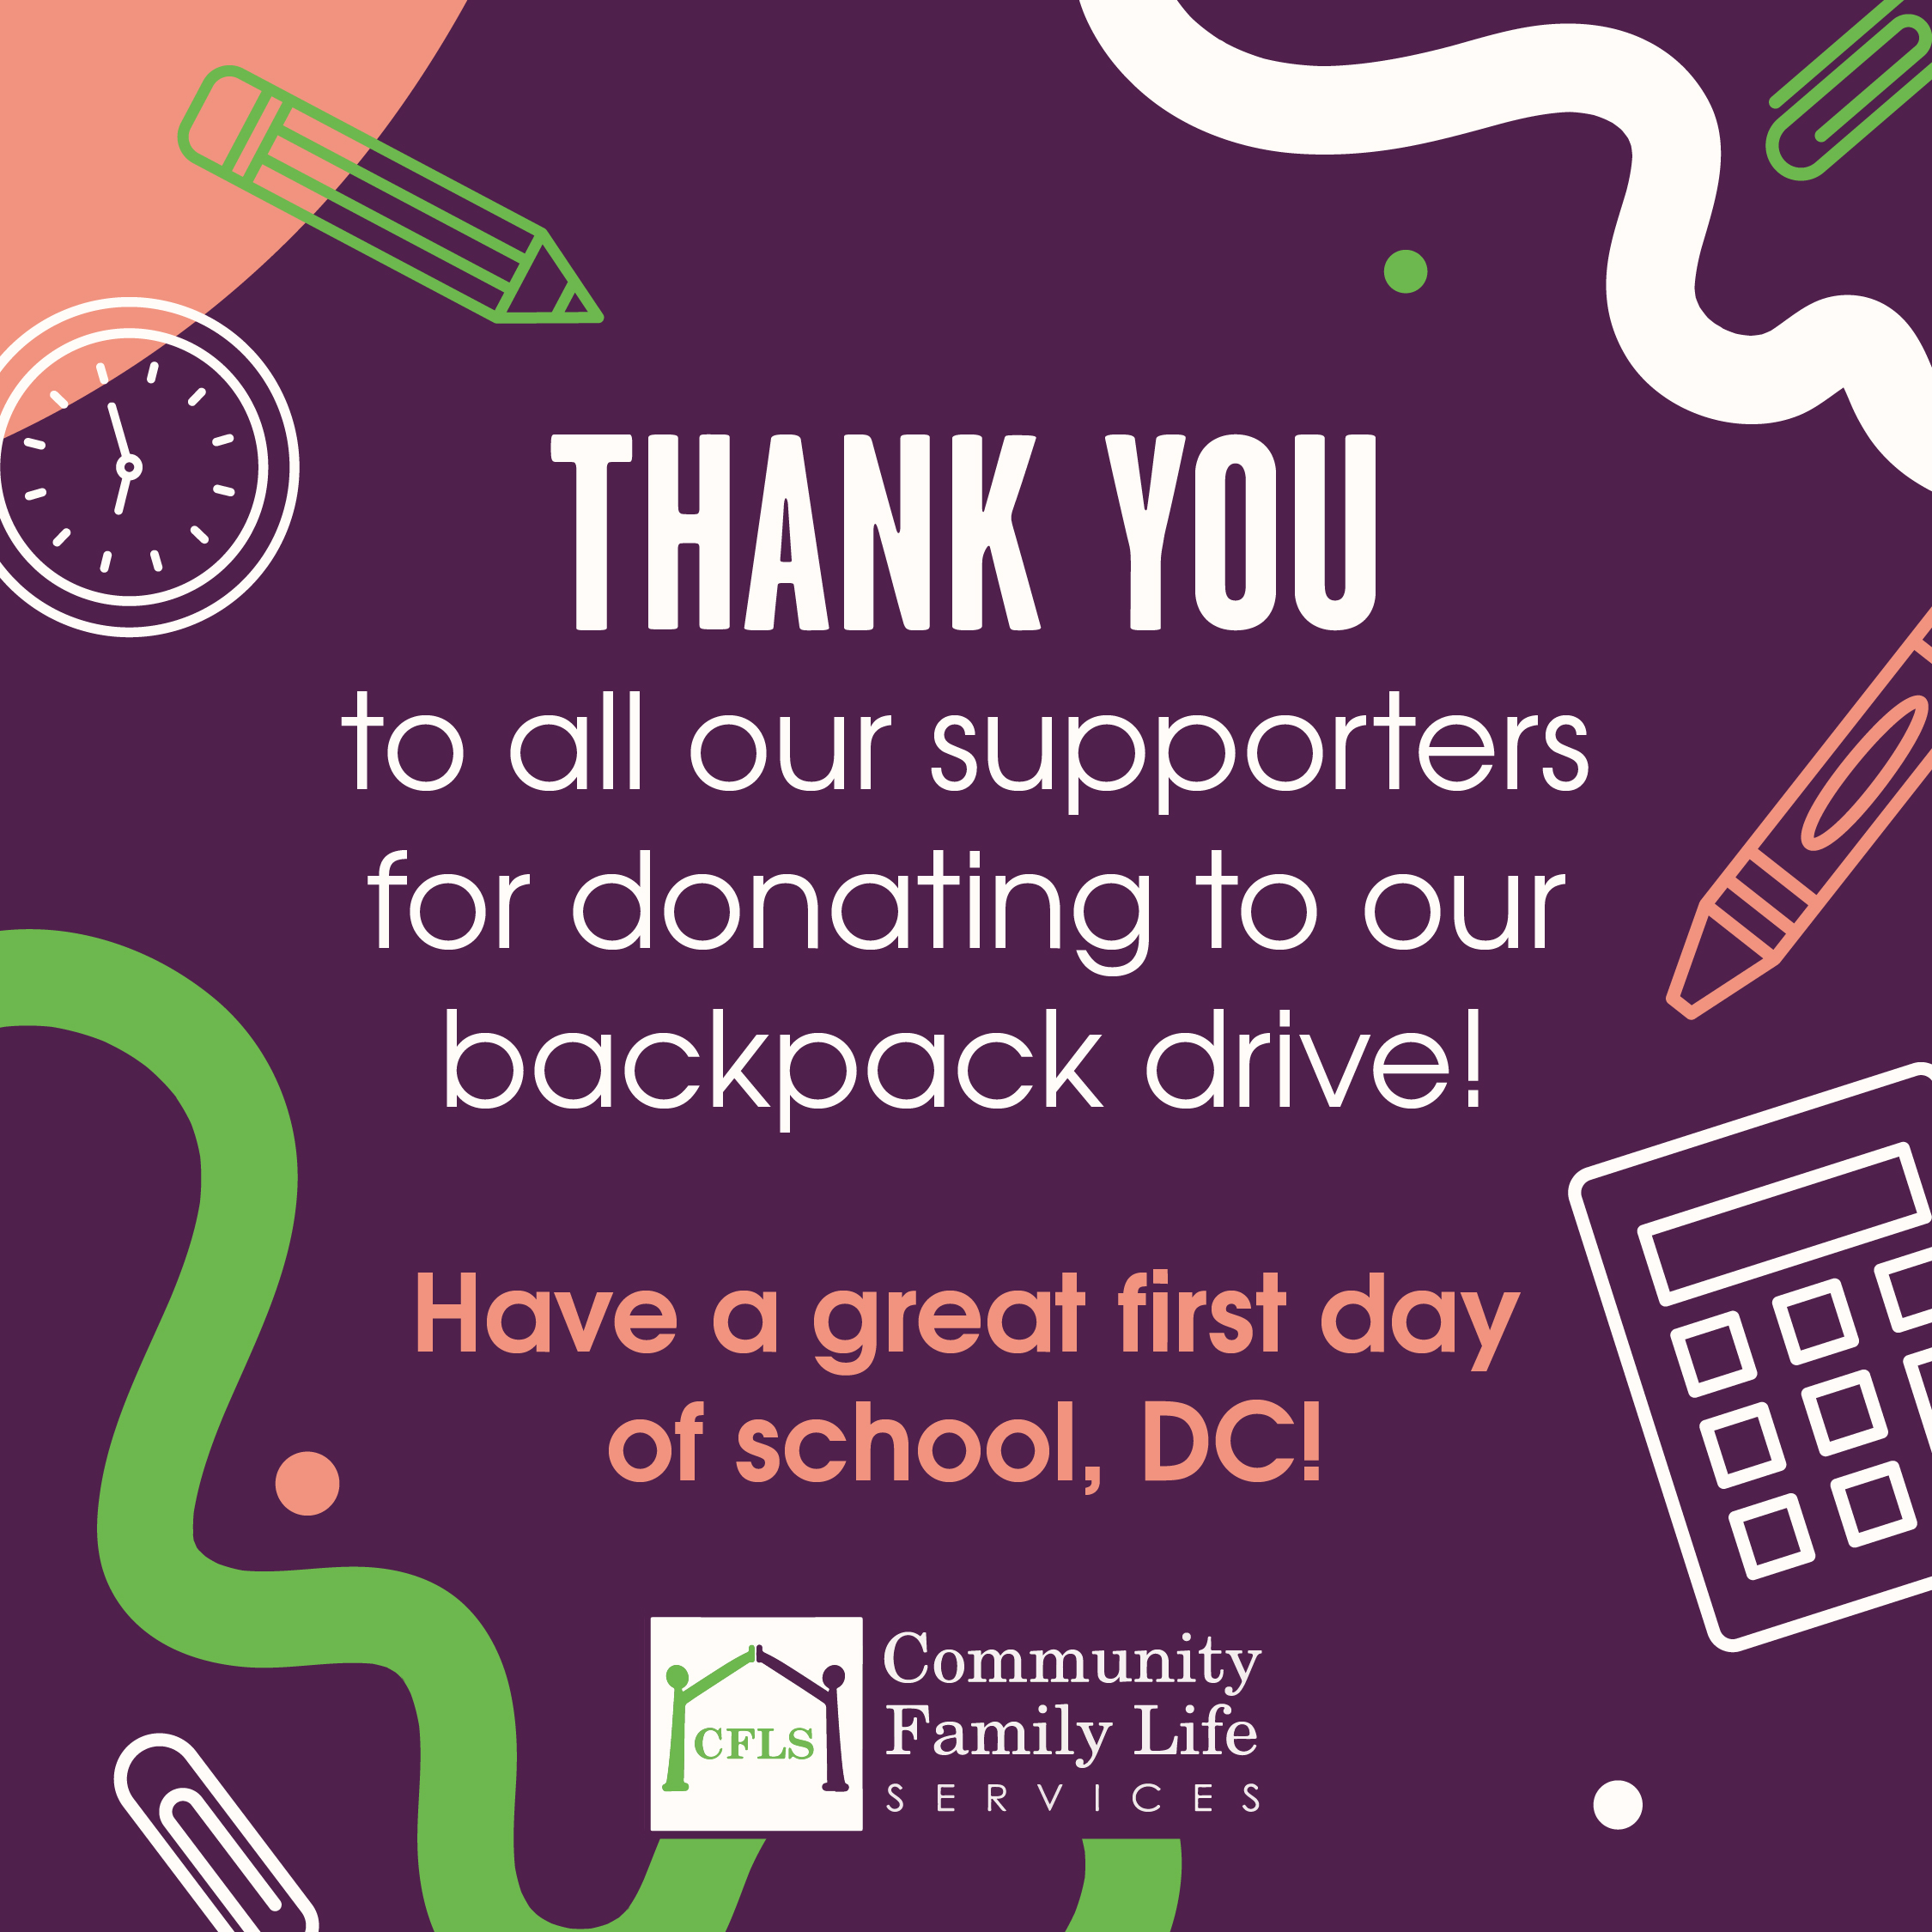 Thank you to all our supports for donating to our backpack drive! Have a great first day of school, DC!